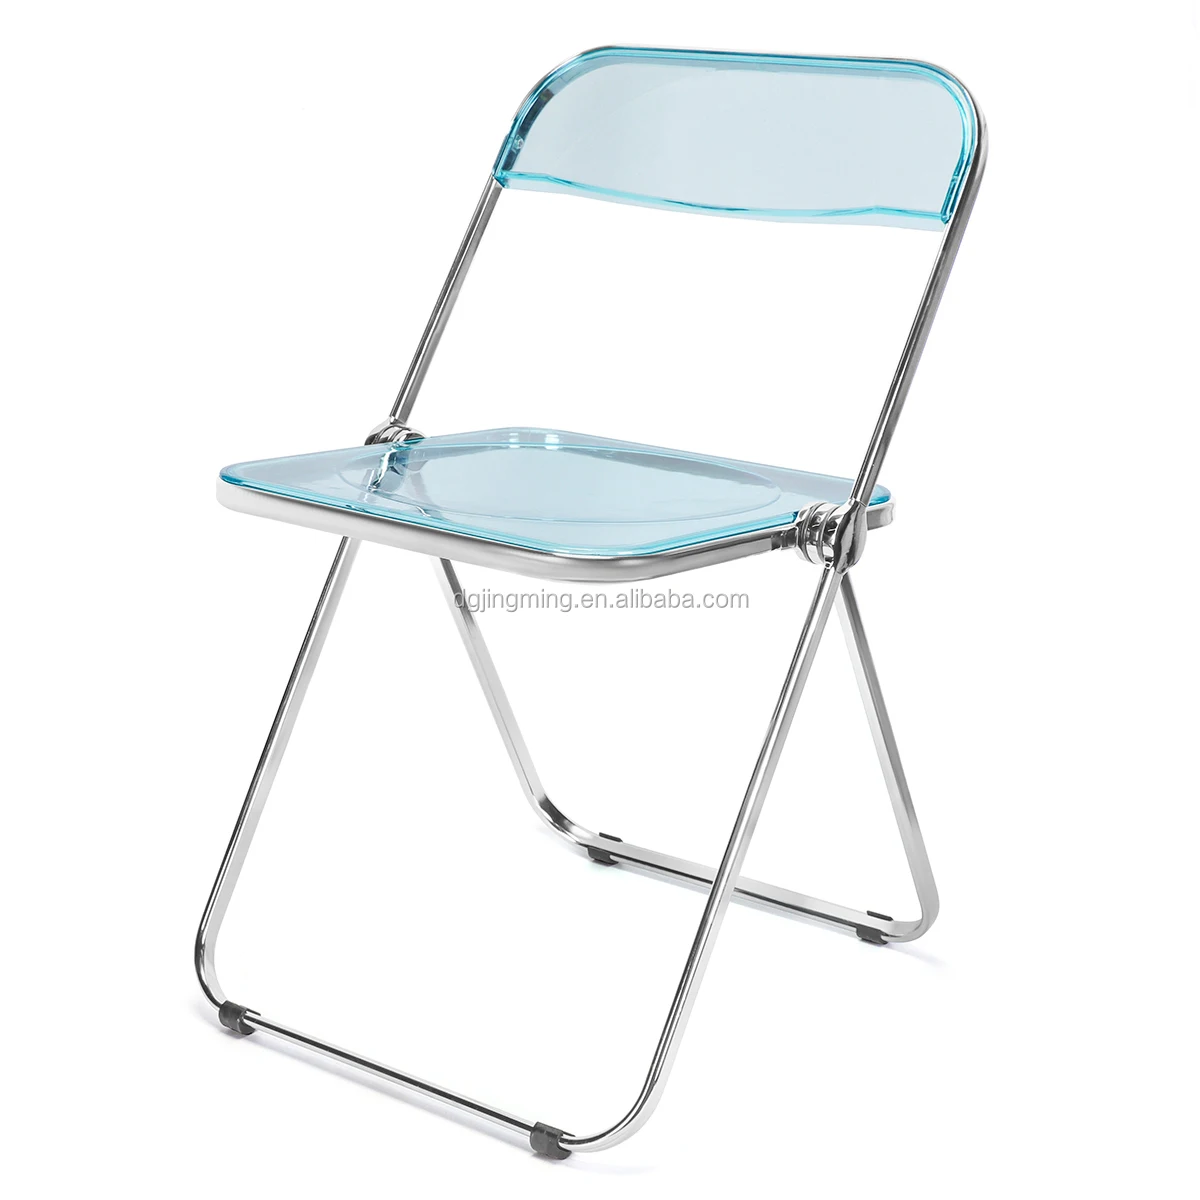 Clear Blue Plastic Folding Chairs Buy Plastic Folded Chairs Italy Plastic Folding Chair Steel Chairs And Transparent Plexiglas Product On Alibaba Com